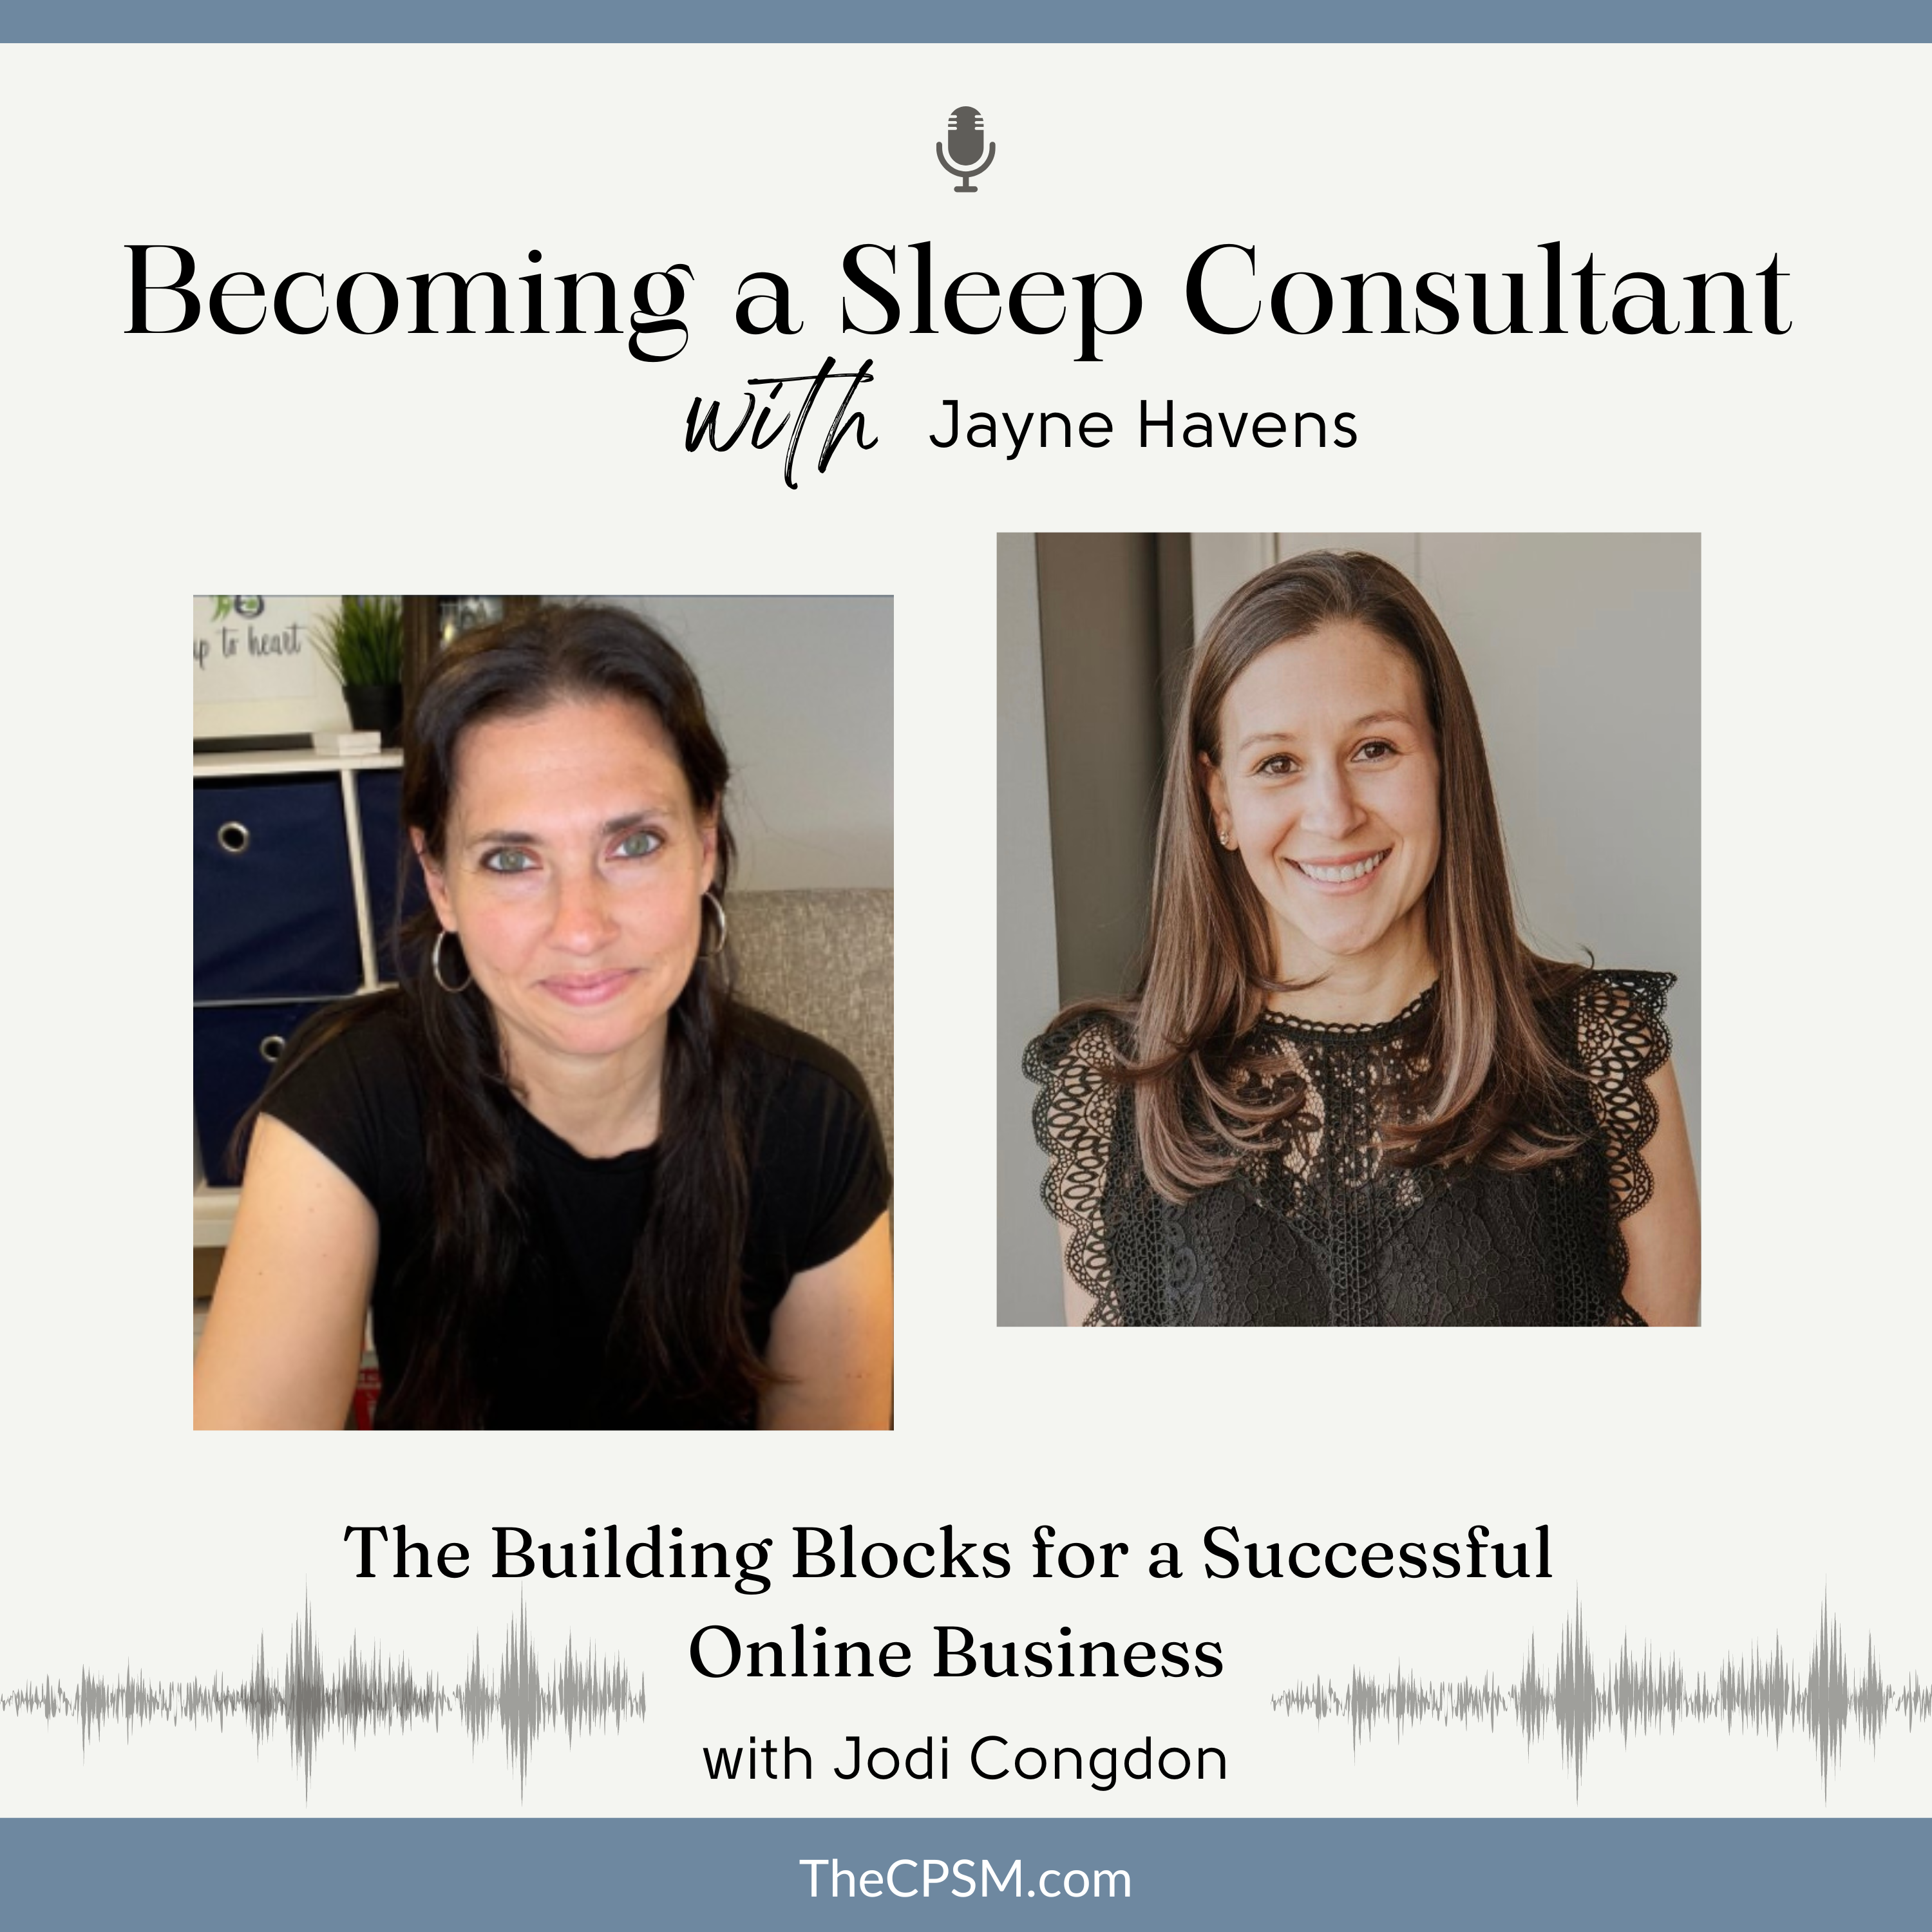 The Building Blocks for a Successful Online Business with Jodi Congdon